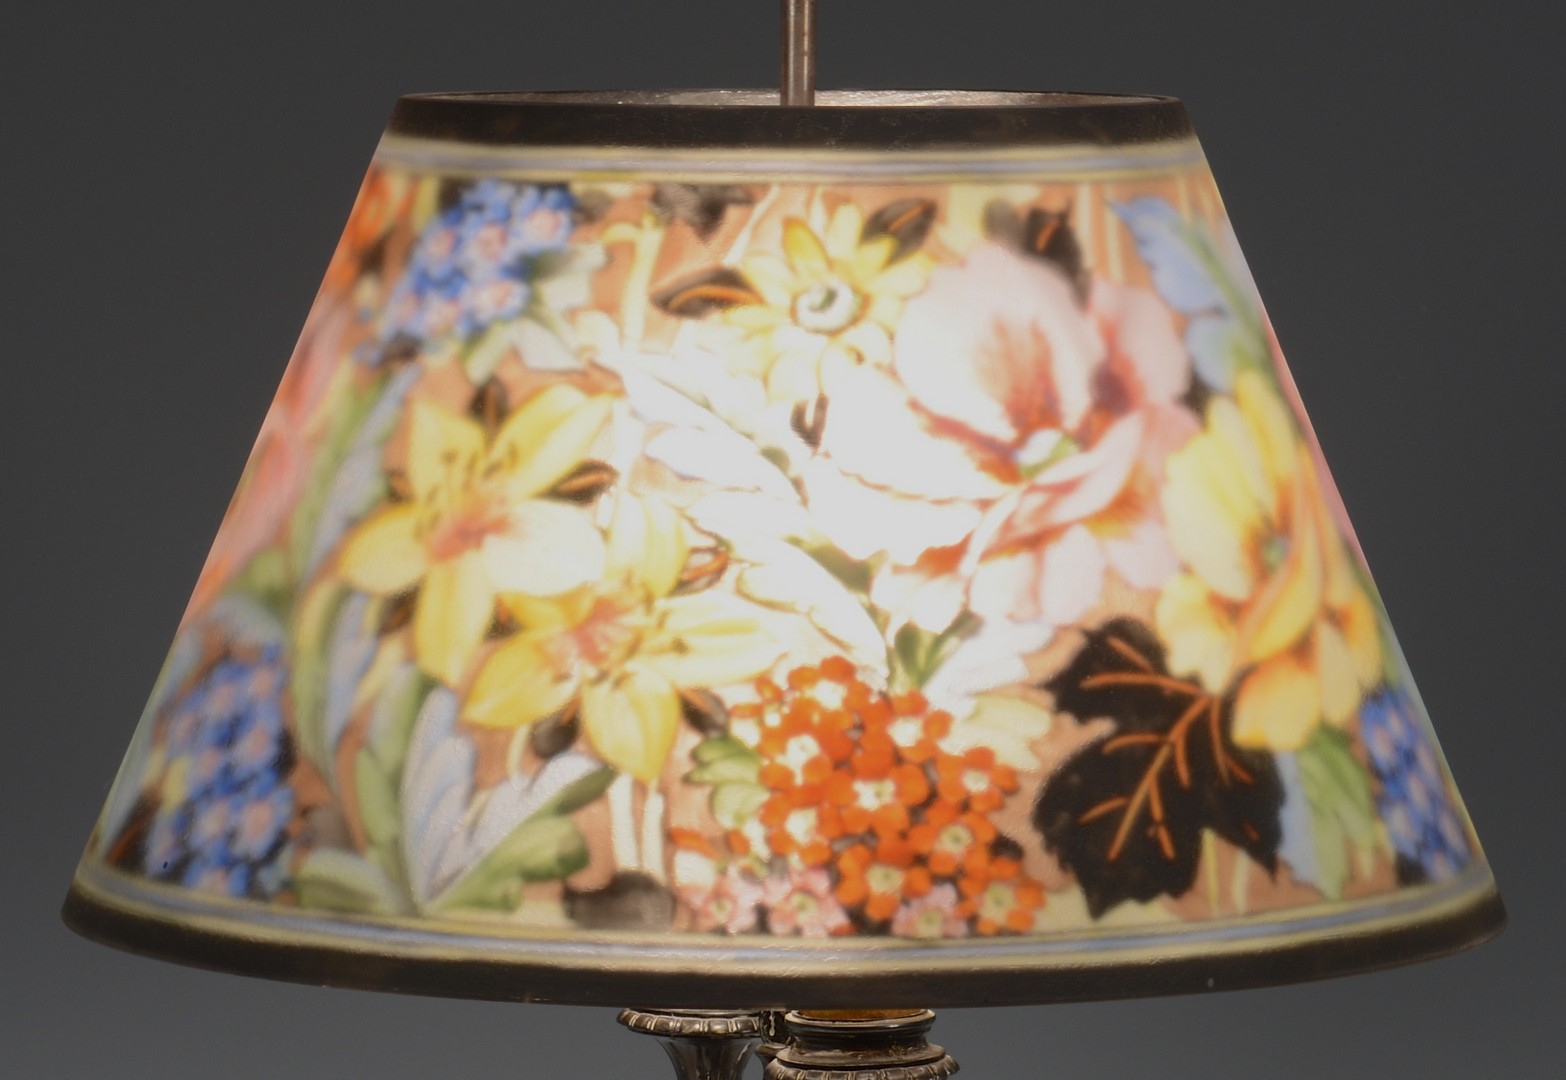 Lot 332: Pairpoint Reverse-Painted Table Lamp